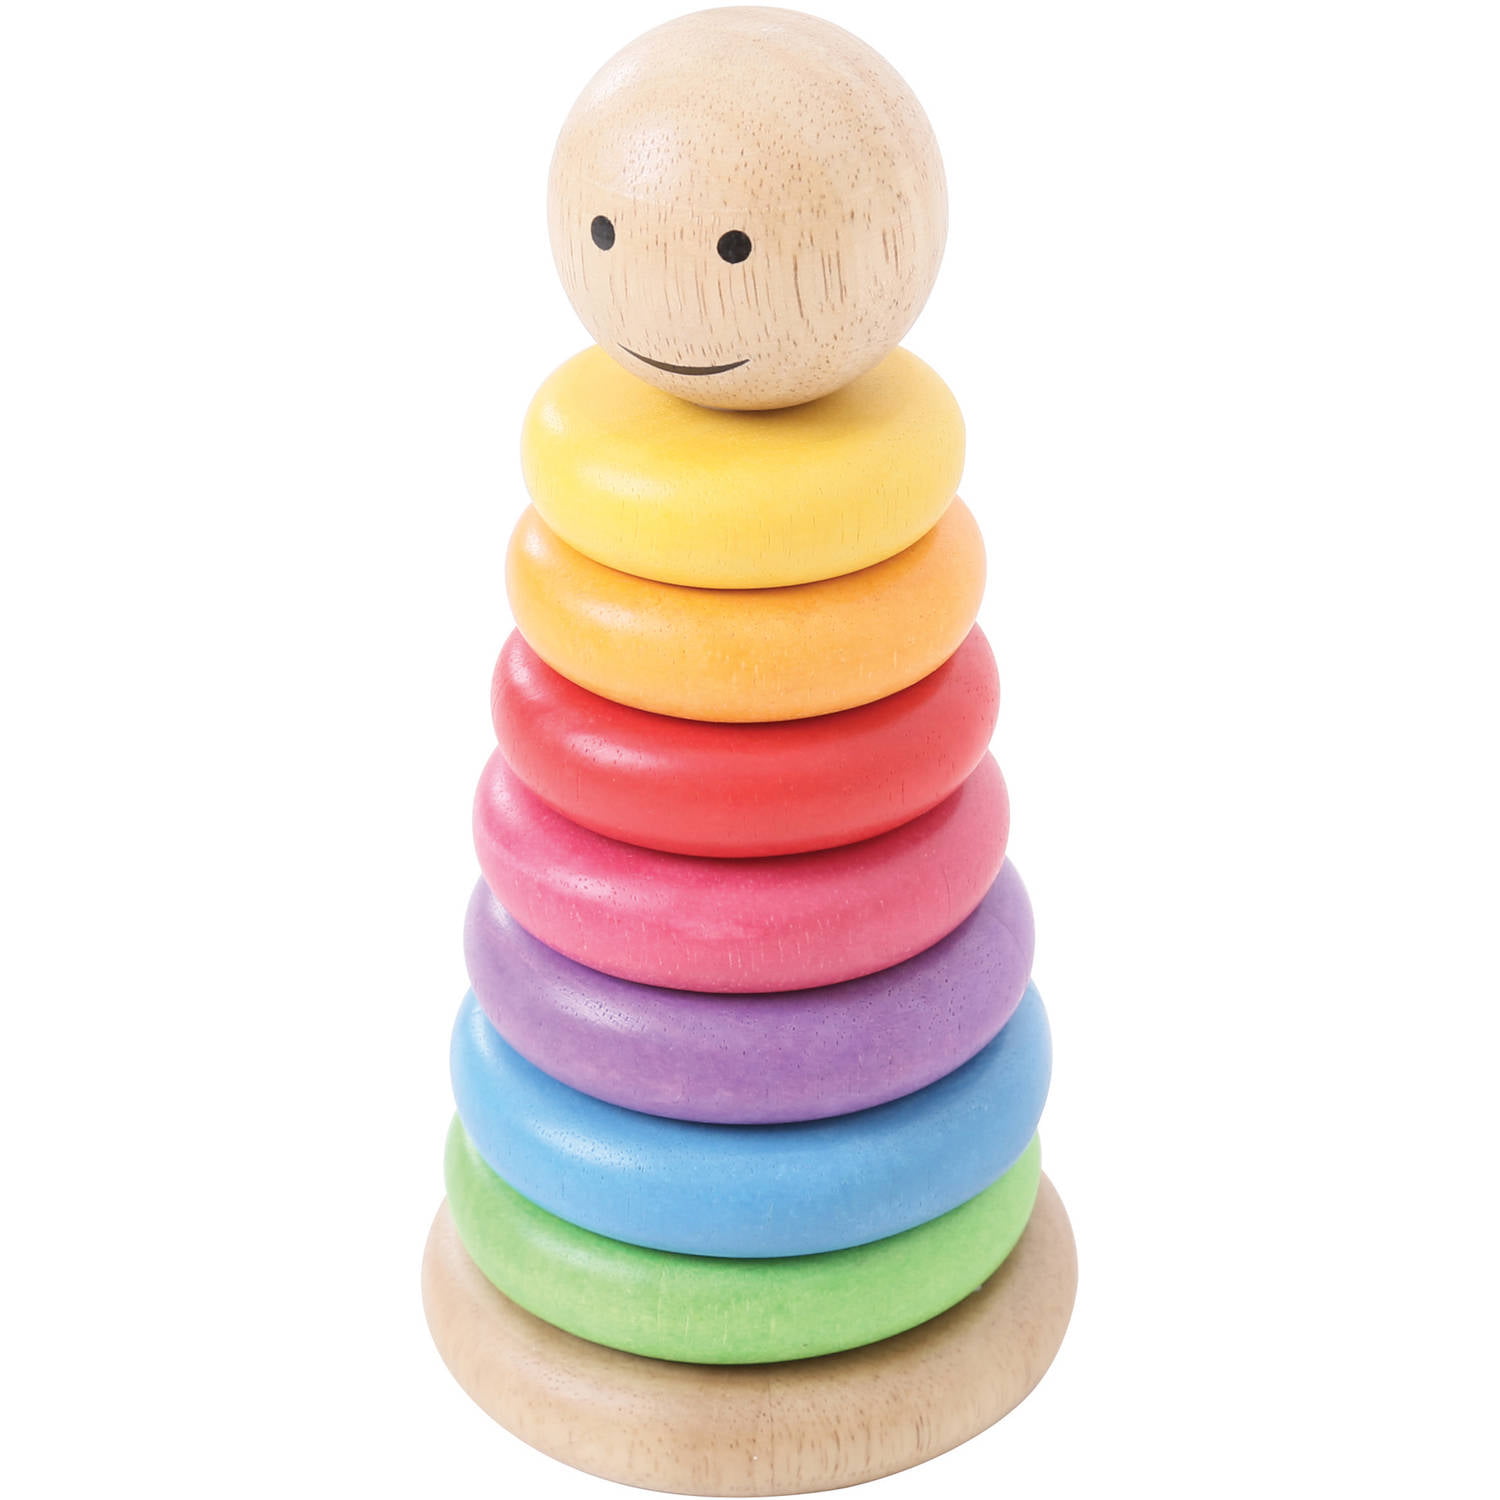 Bigjigs Toys Stacking Ball Fall Toy